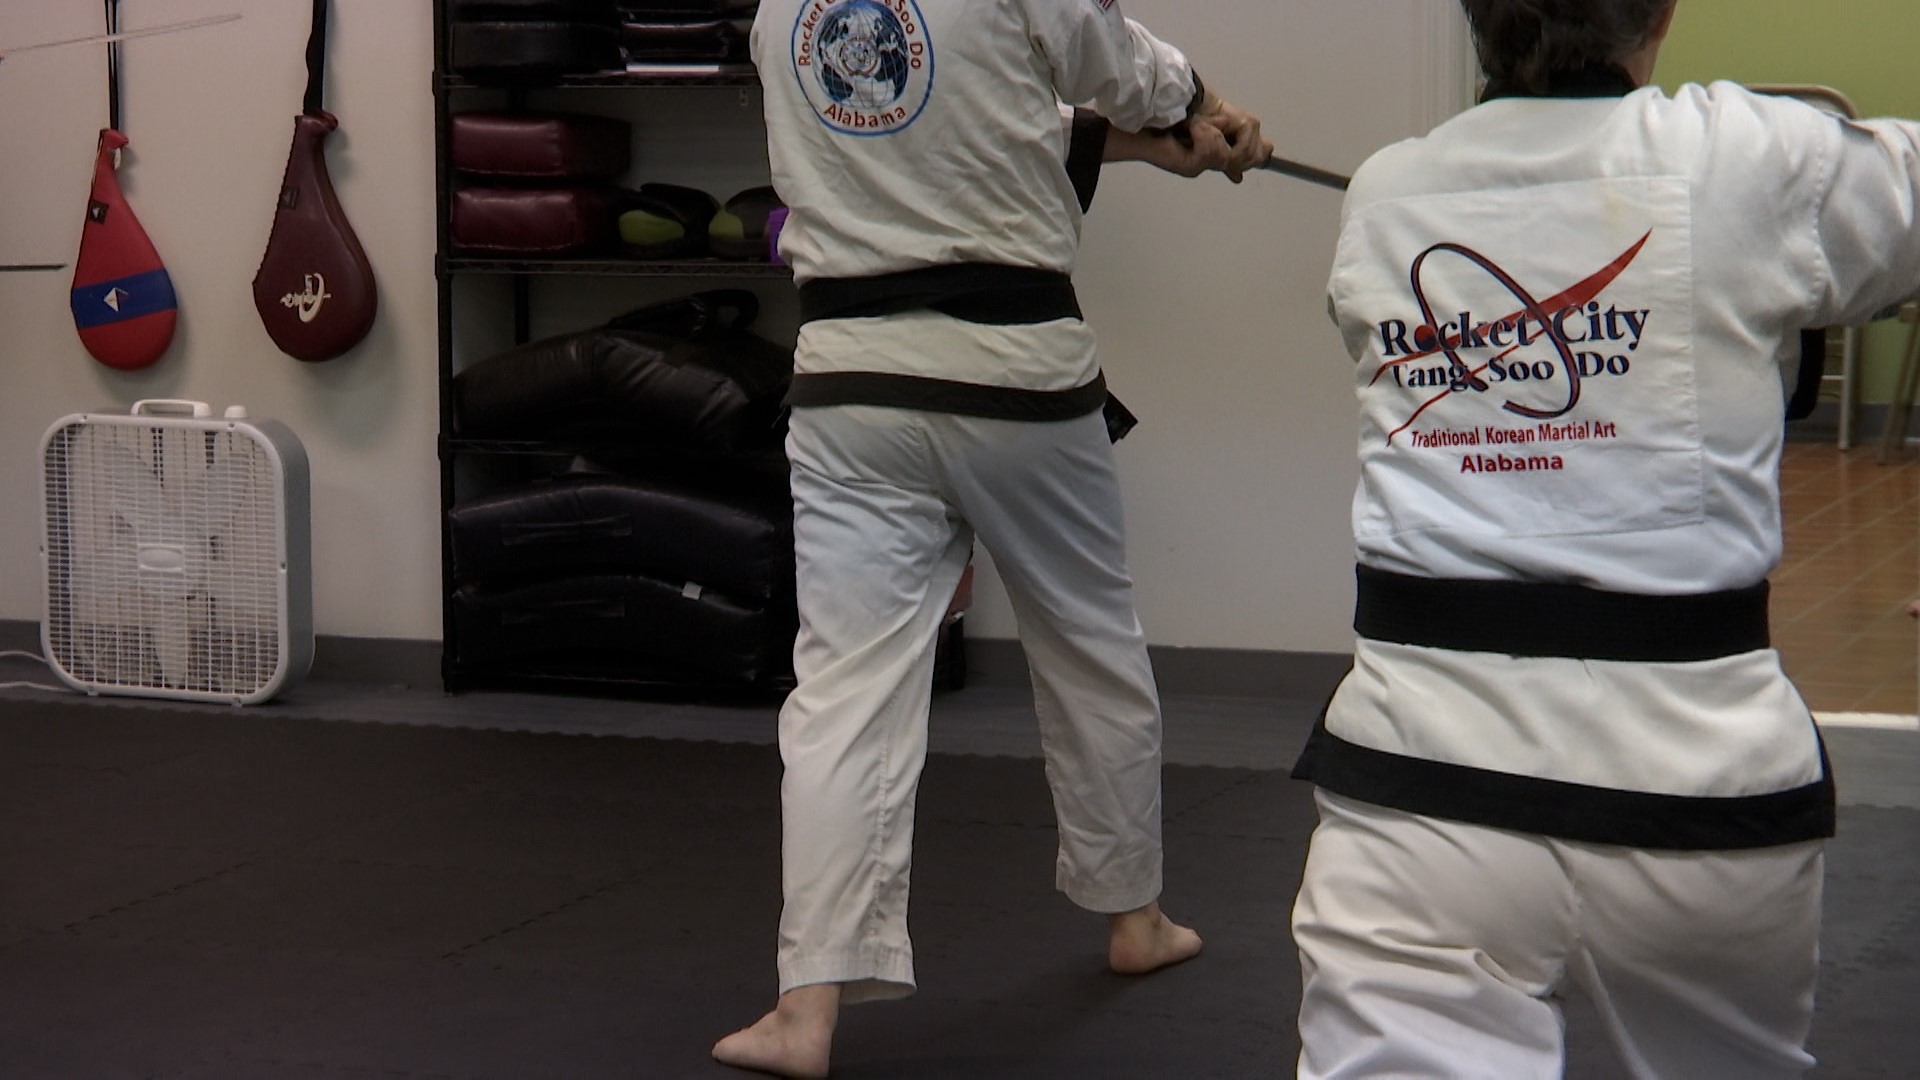 Rocket City Tang Soo Do offers free self defense classes to women and children